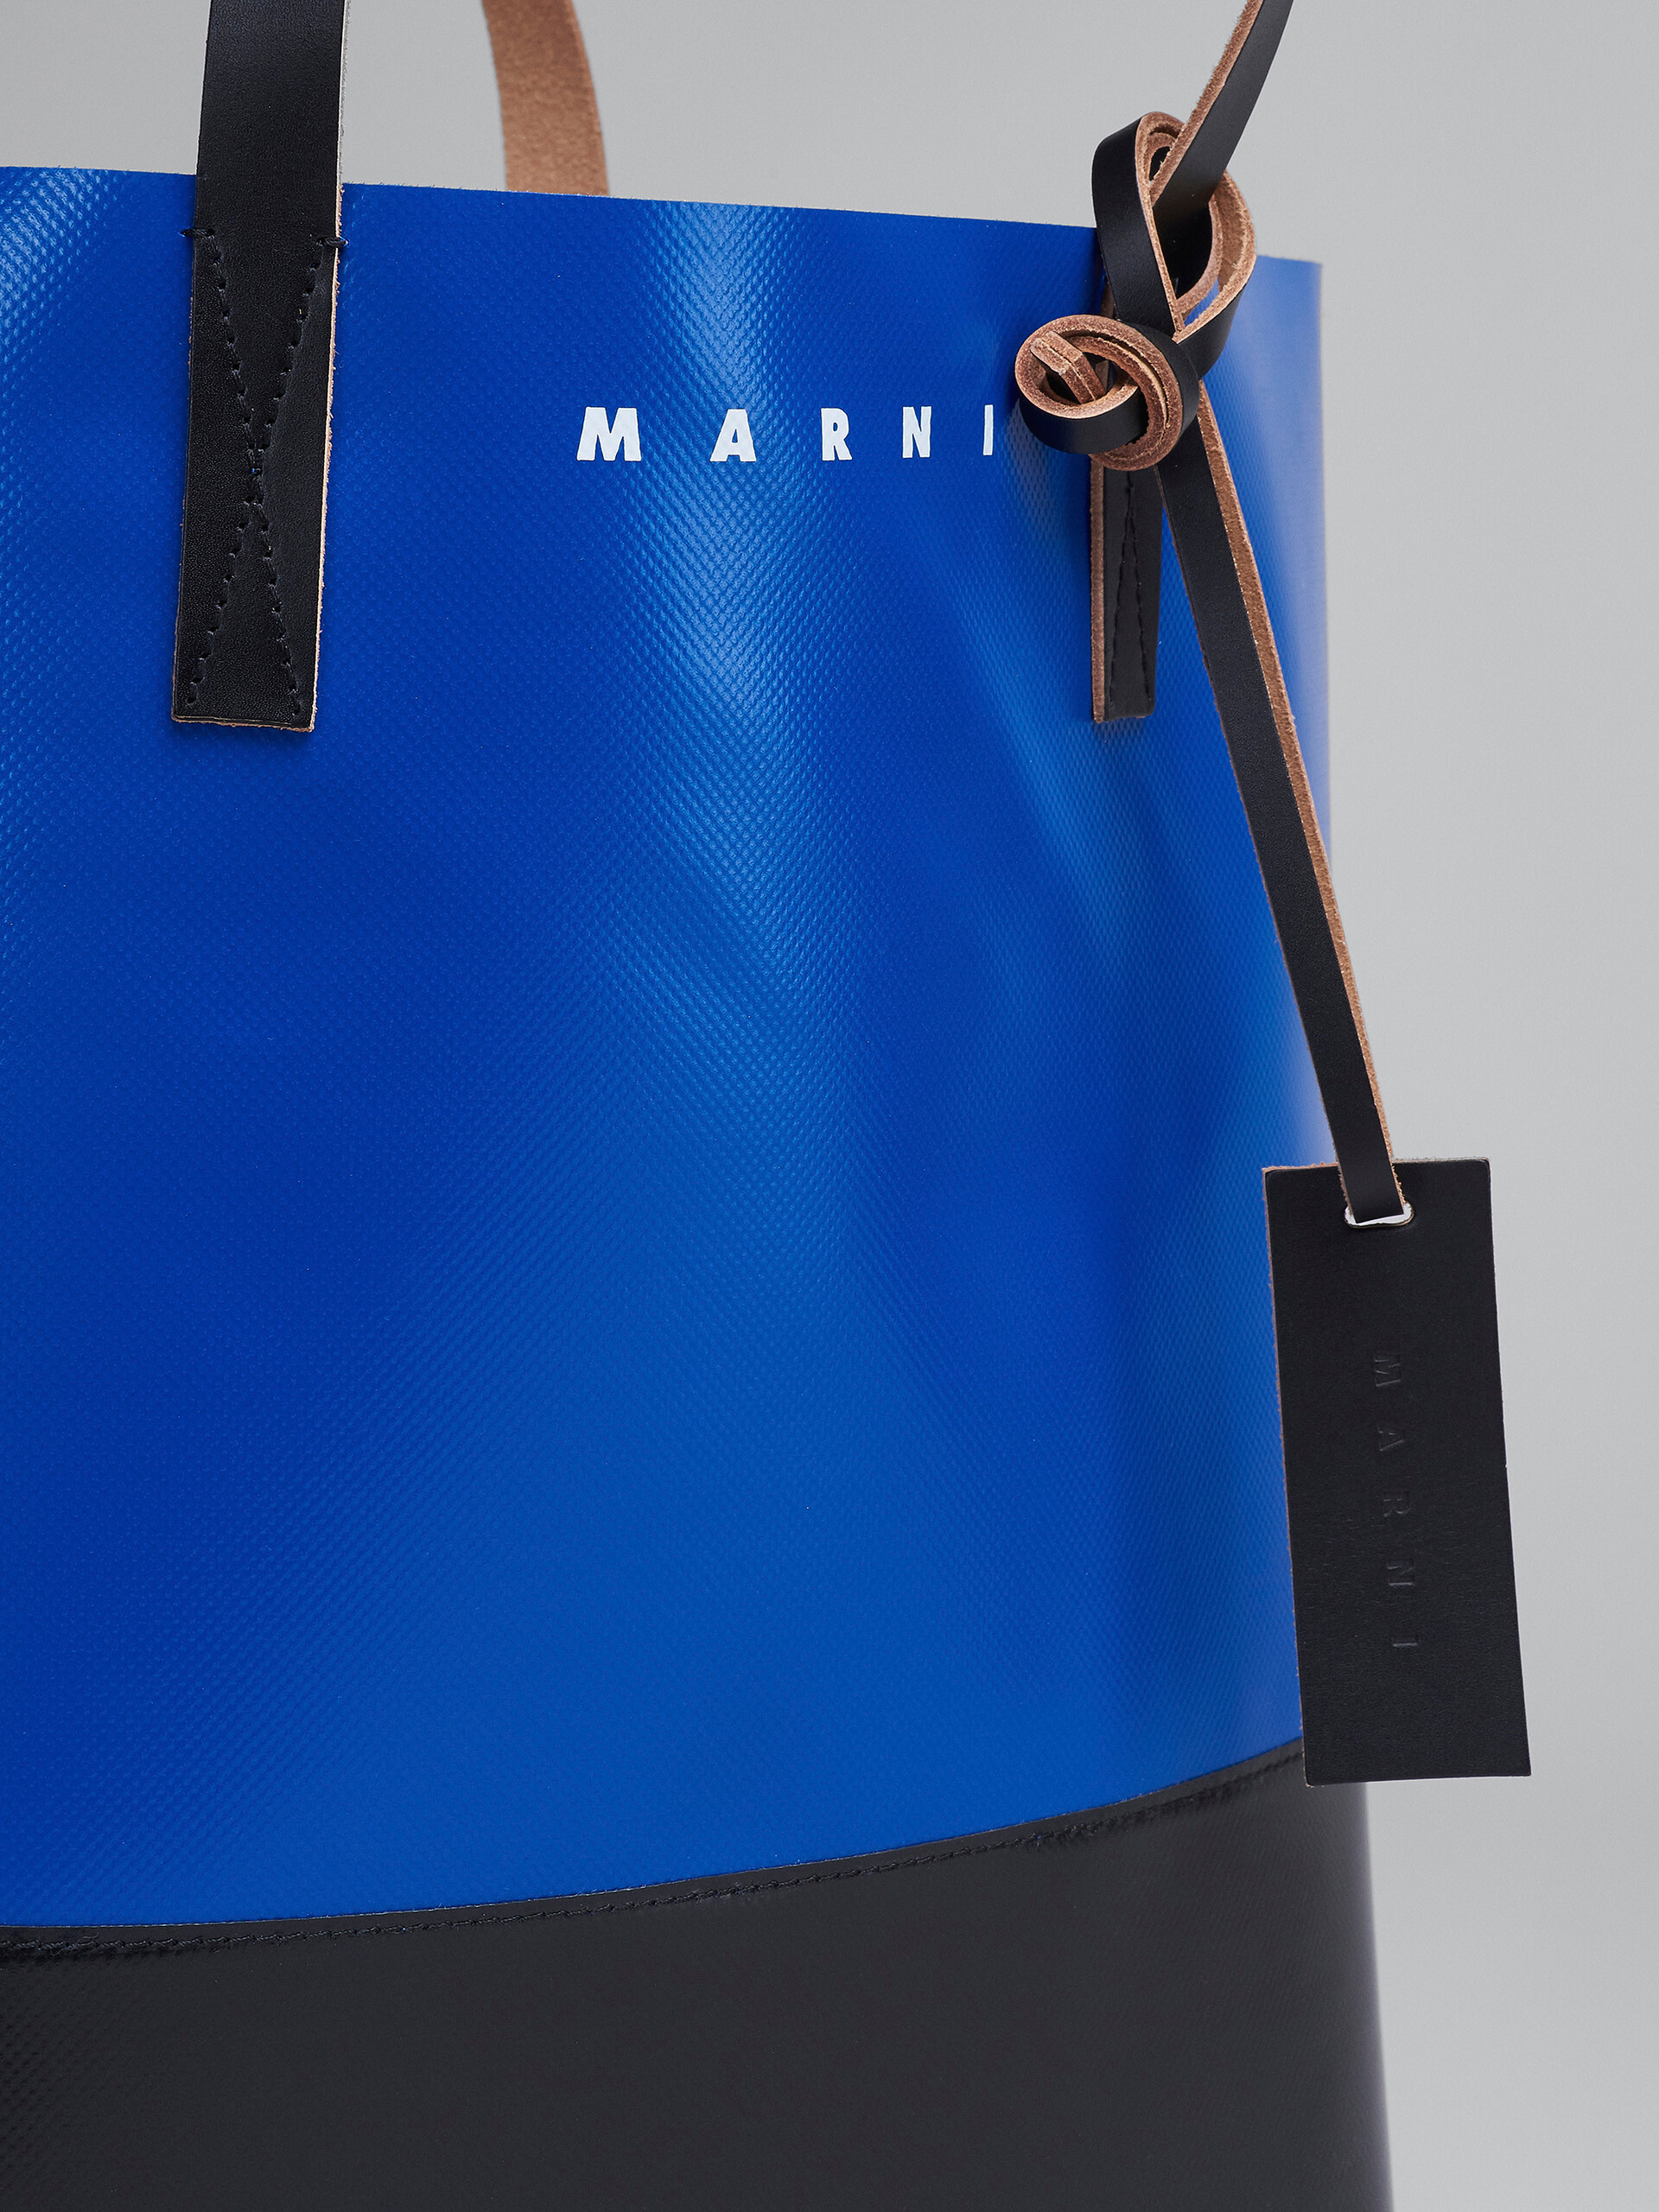 Tribeca shopping bag in blue and black - Shopping Bags - Image 5